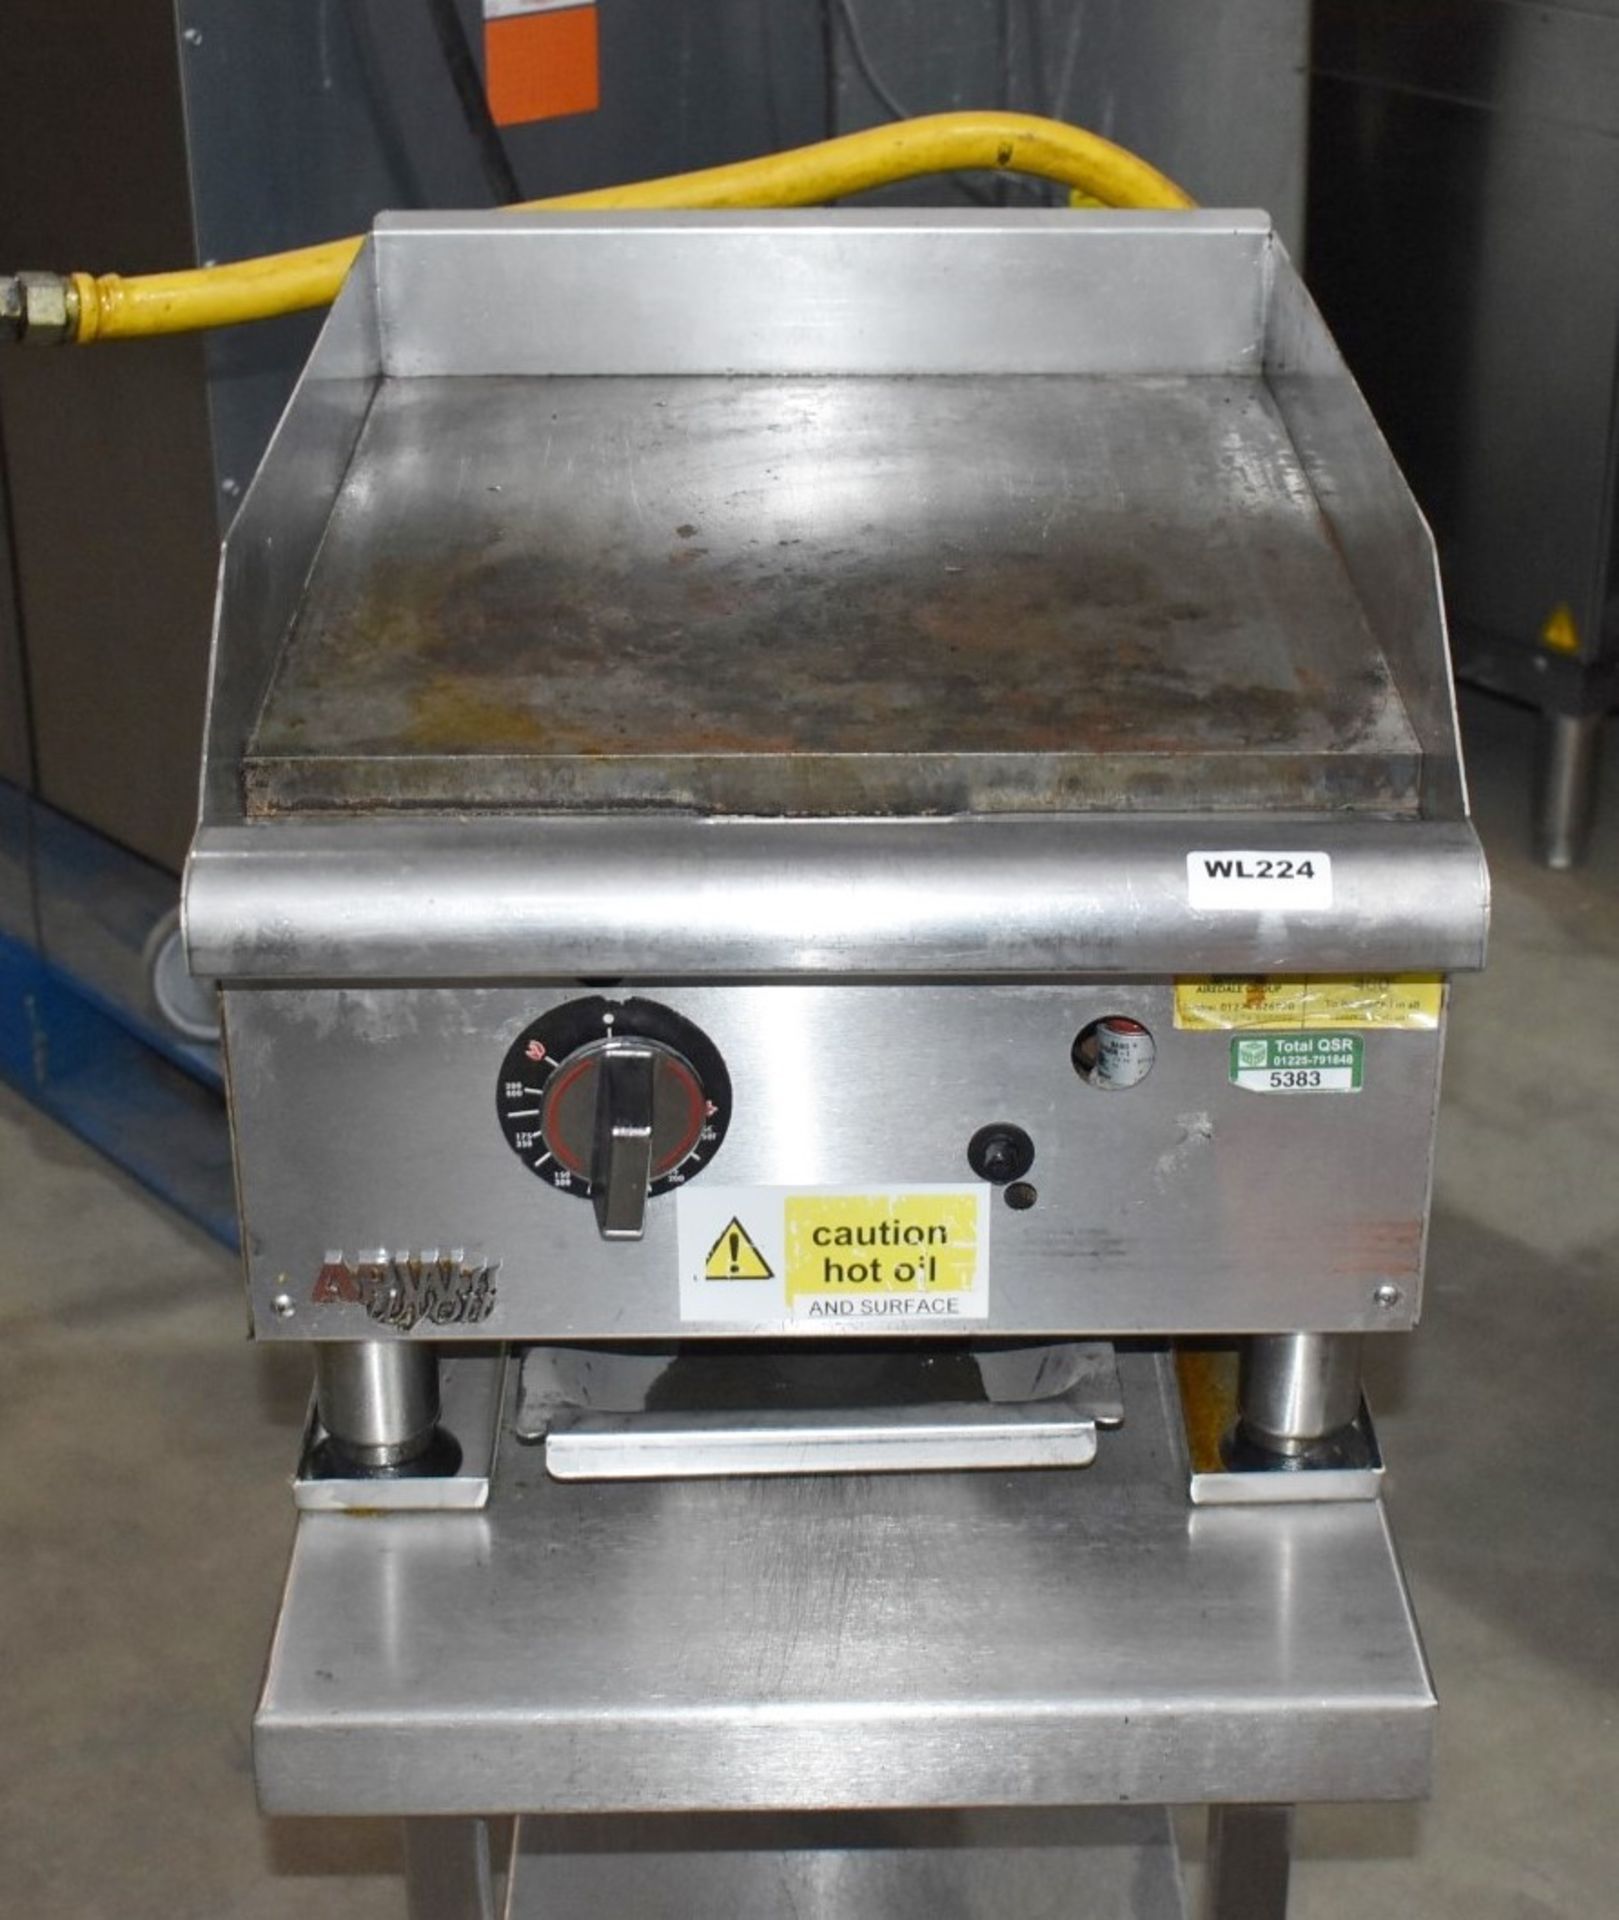 1 x APW Wyott Commercial Solid Top Cooking Griddle With Stand - Gas Powered - Size H99 x W46 x D60 - Image 4 of 10